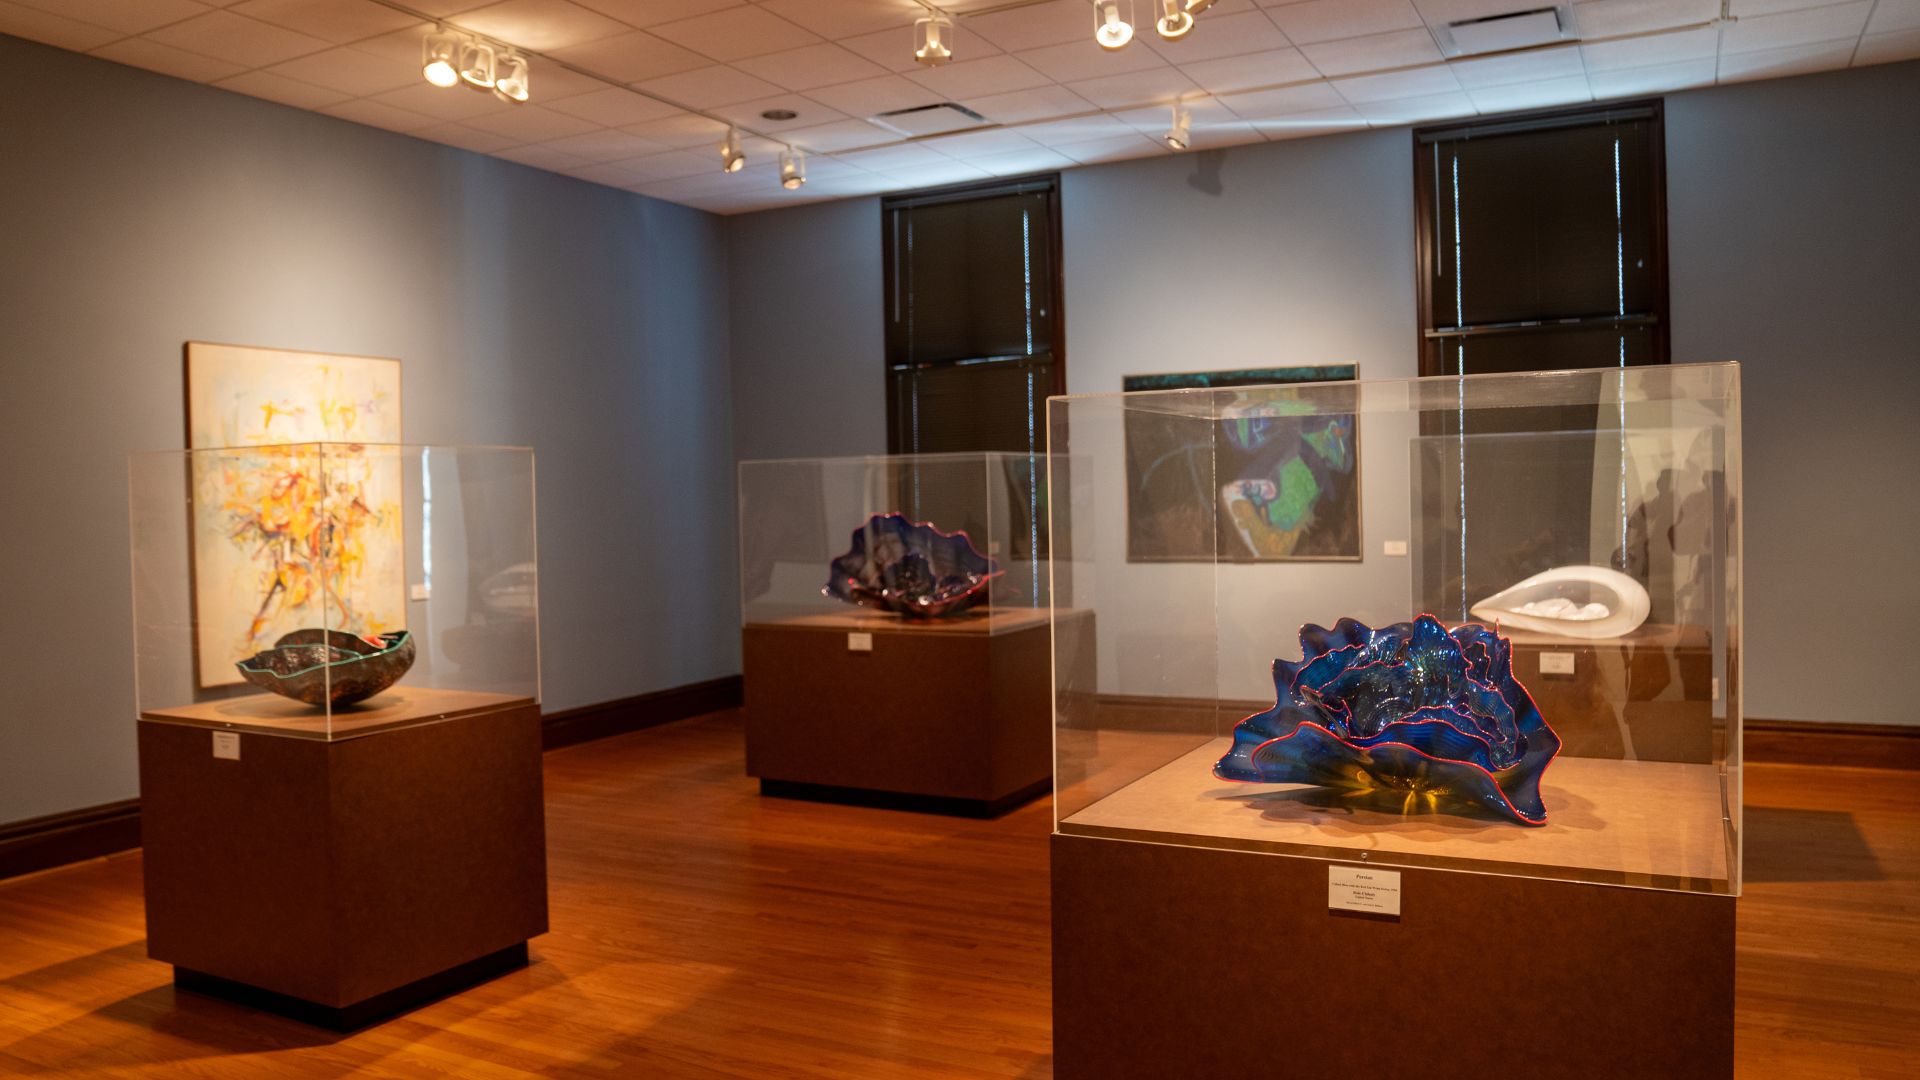 The Saint Louis University Museum of Art encompasses an impressive permanent collection of works by modern masters.